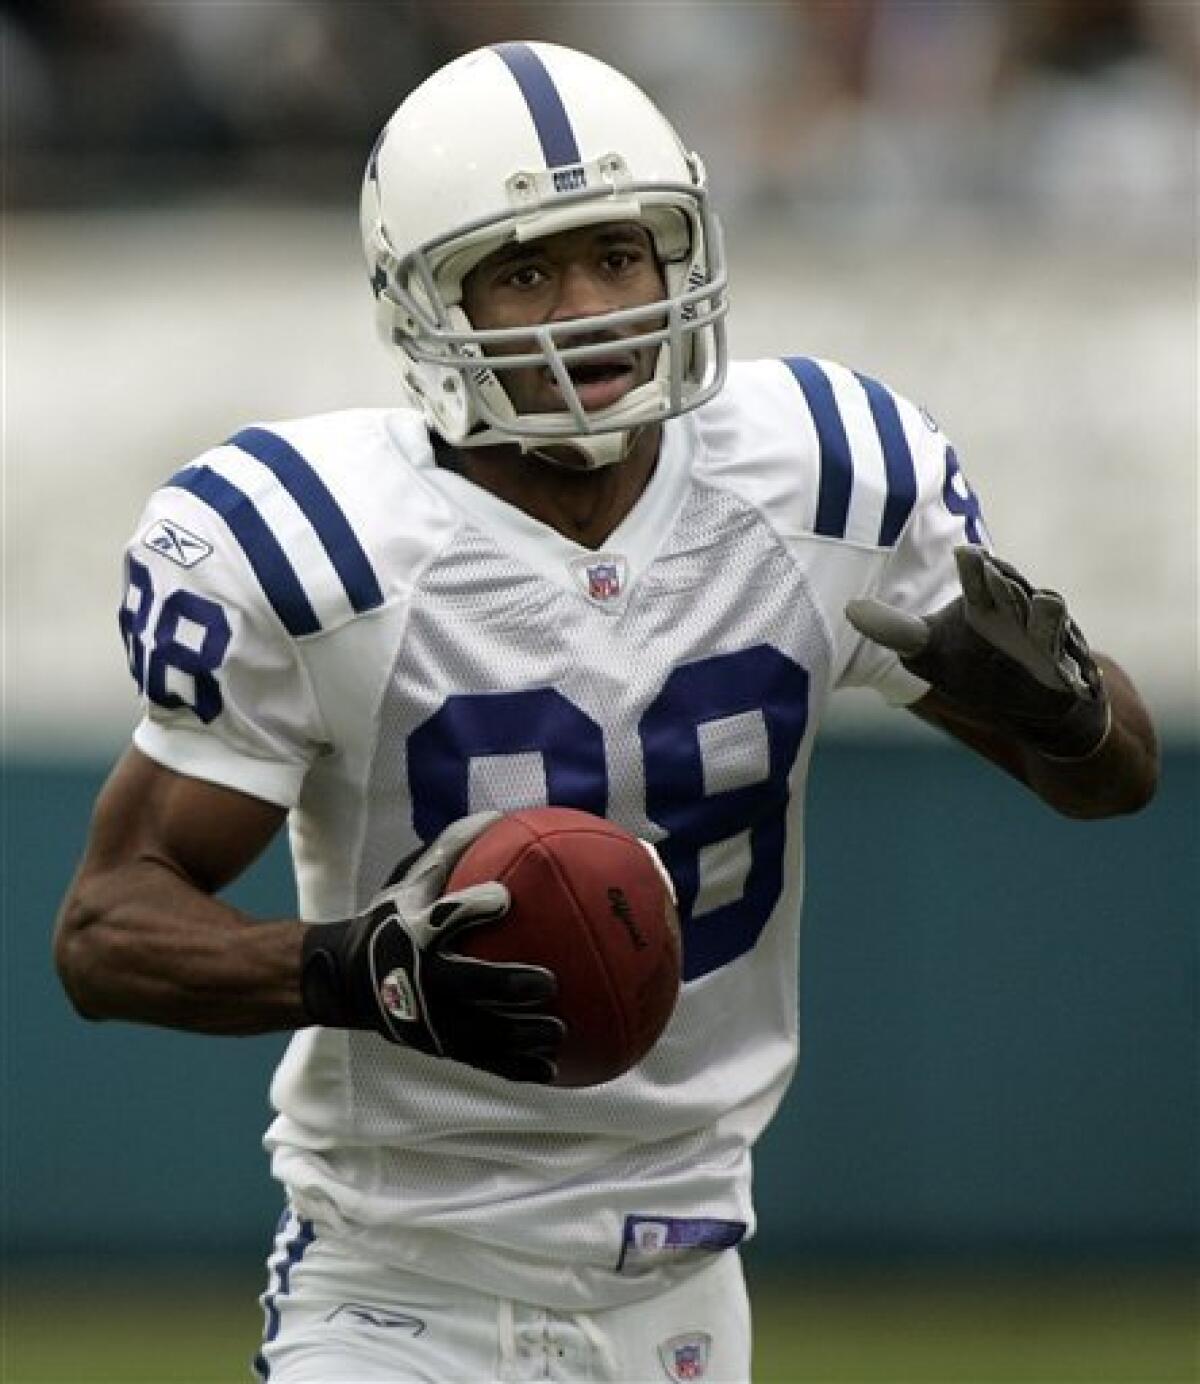 In this Dec. 11, 2005, file photo, Indianapolis Colts receiver Marvin Harrison scores a touchdown against the Jacksonville Jaguars in an NFL football game in Jacksonville, Fla. Harrison's reluctance to take a pay cut could mark the end of his career in Indianapolis. (AP Photo/Phil Coale, File)